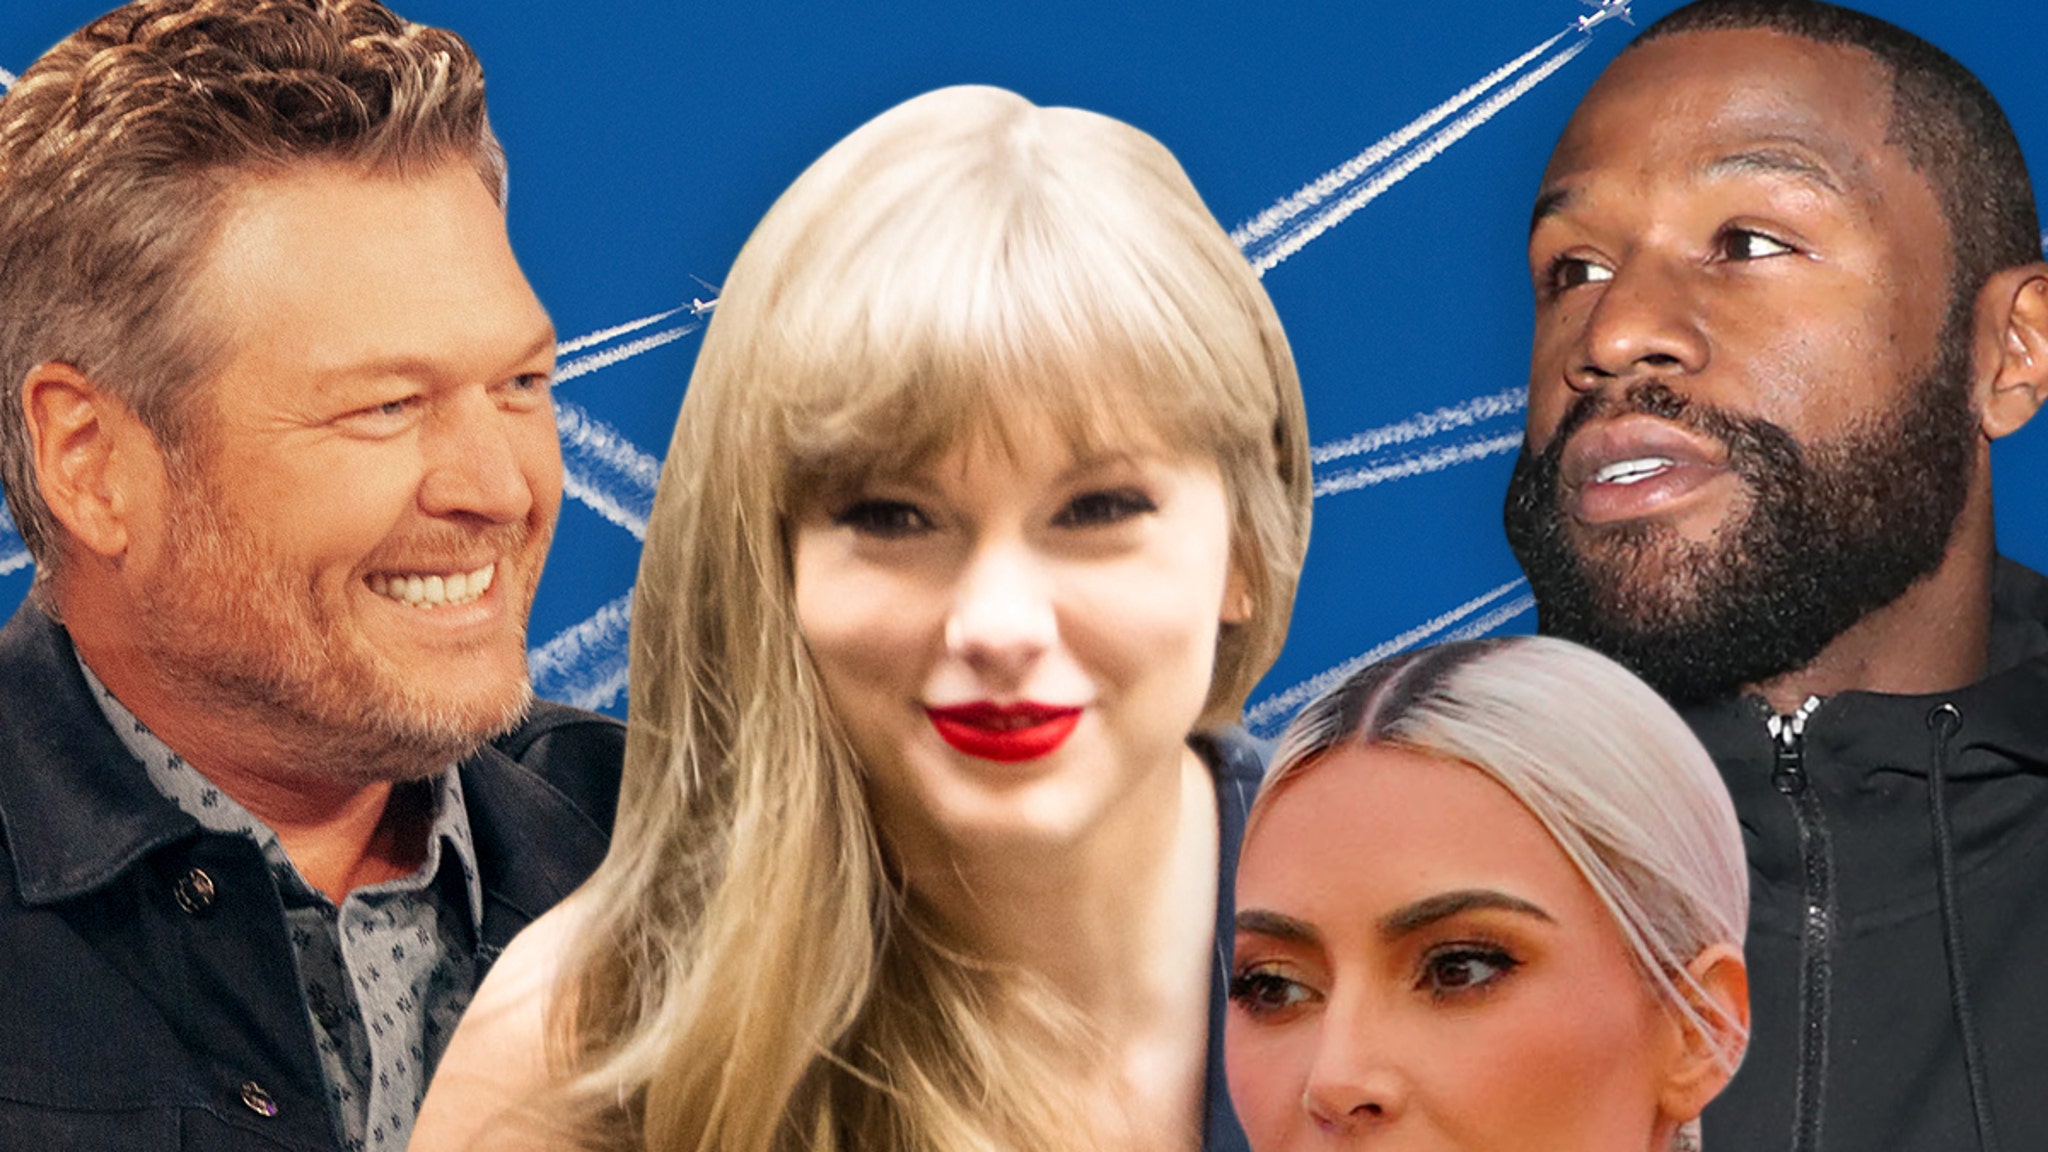 Taylor Swift and Kim Kardashian among the celebrities who leave the biggest carbon footprint